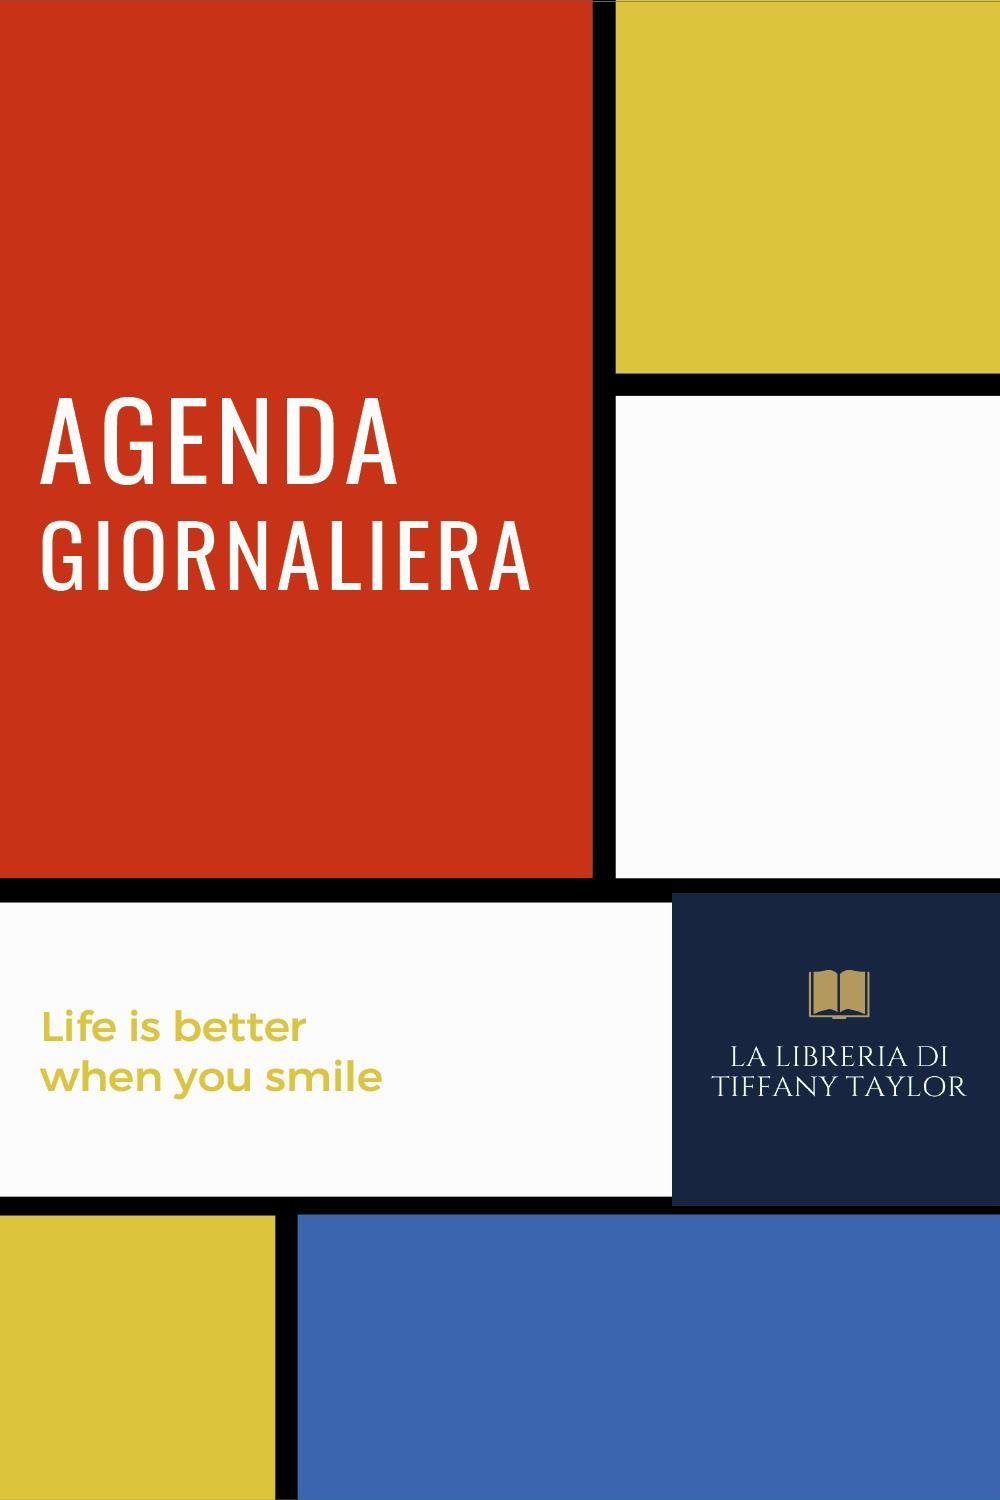 Agenda giornaliera. Life is better when you smile